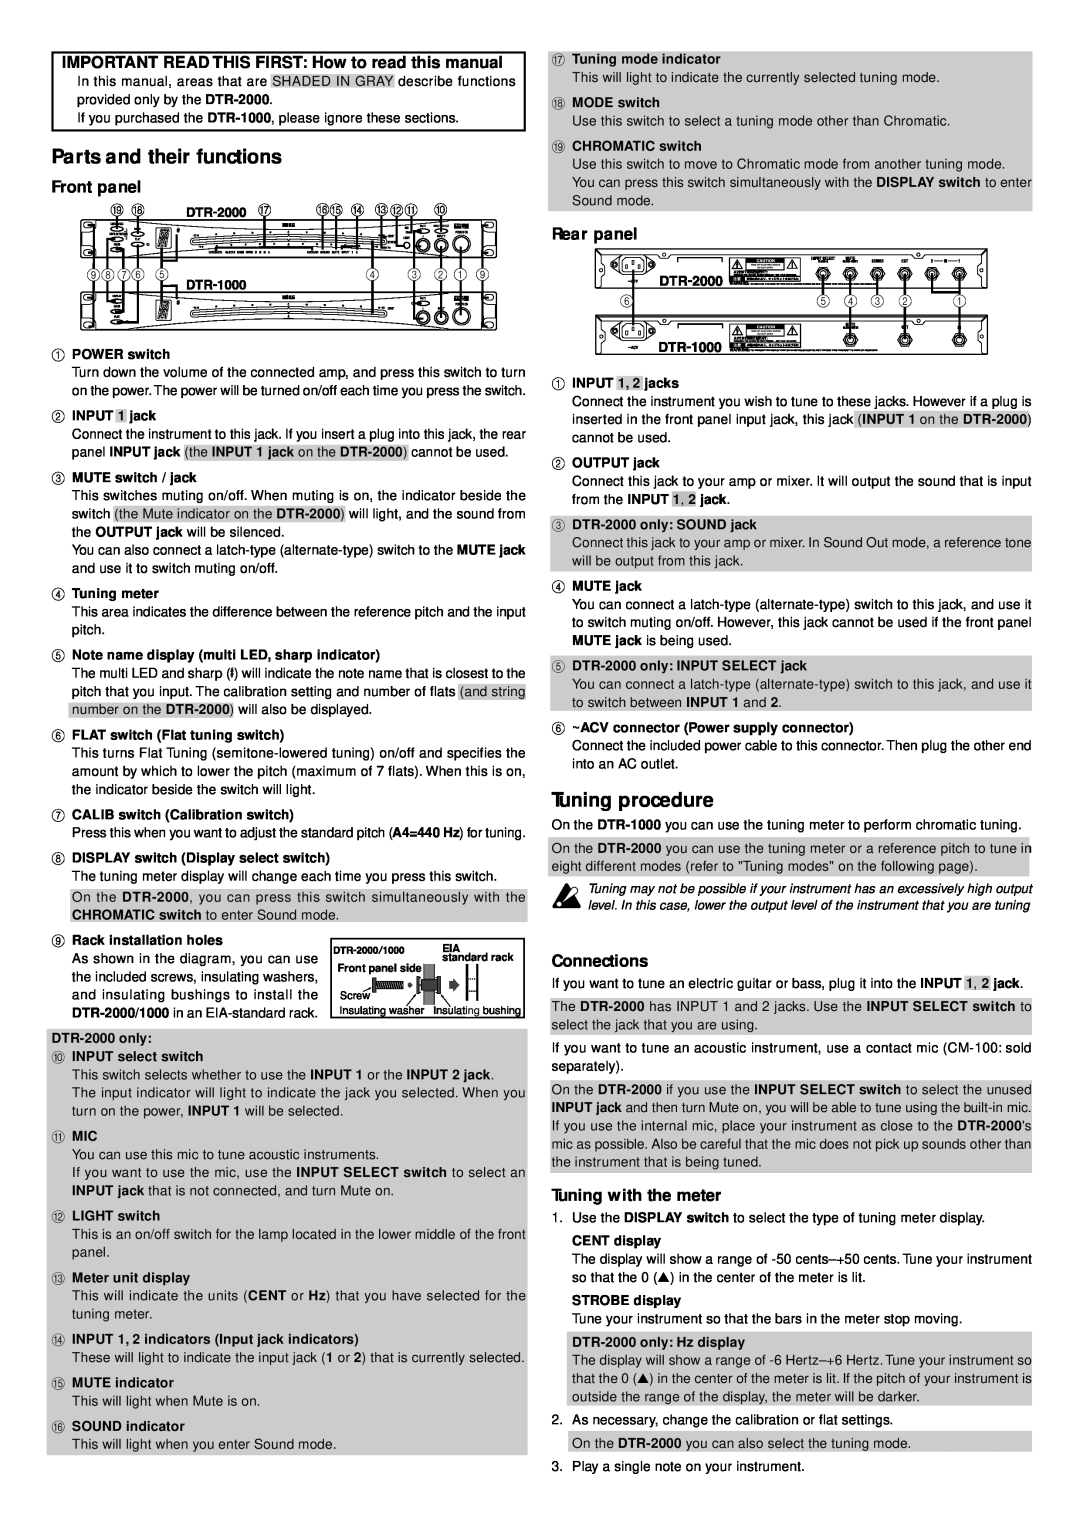 Korg DTR-2000 Parts and their functions, Tuning procedure, Front panel, Rear panel, Connections, Tuning with the meter 